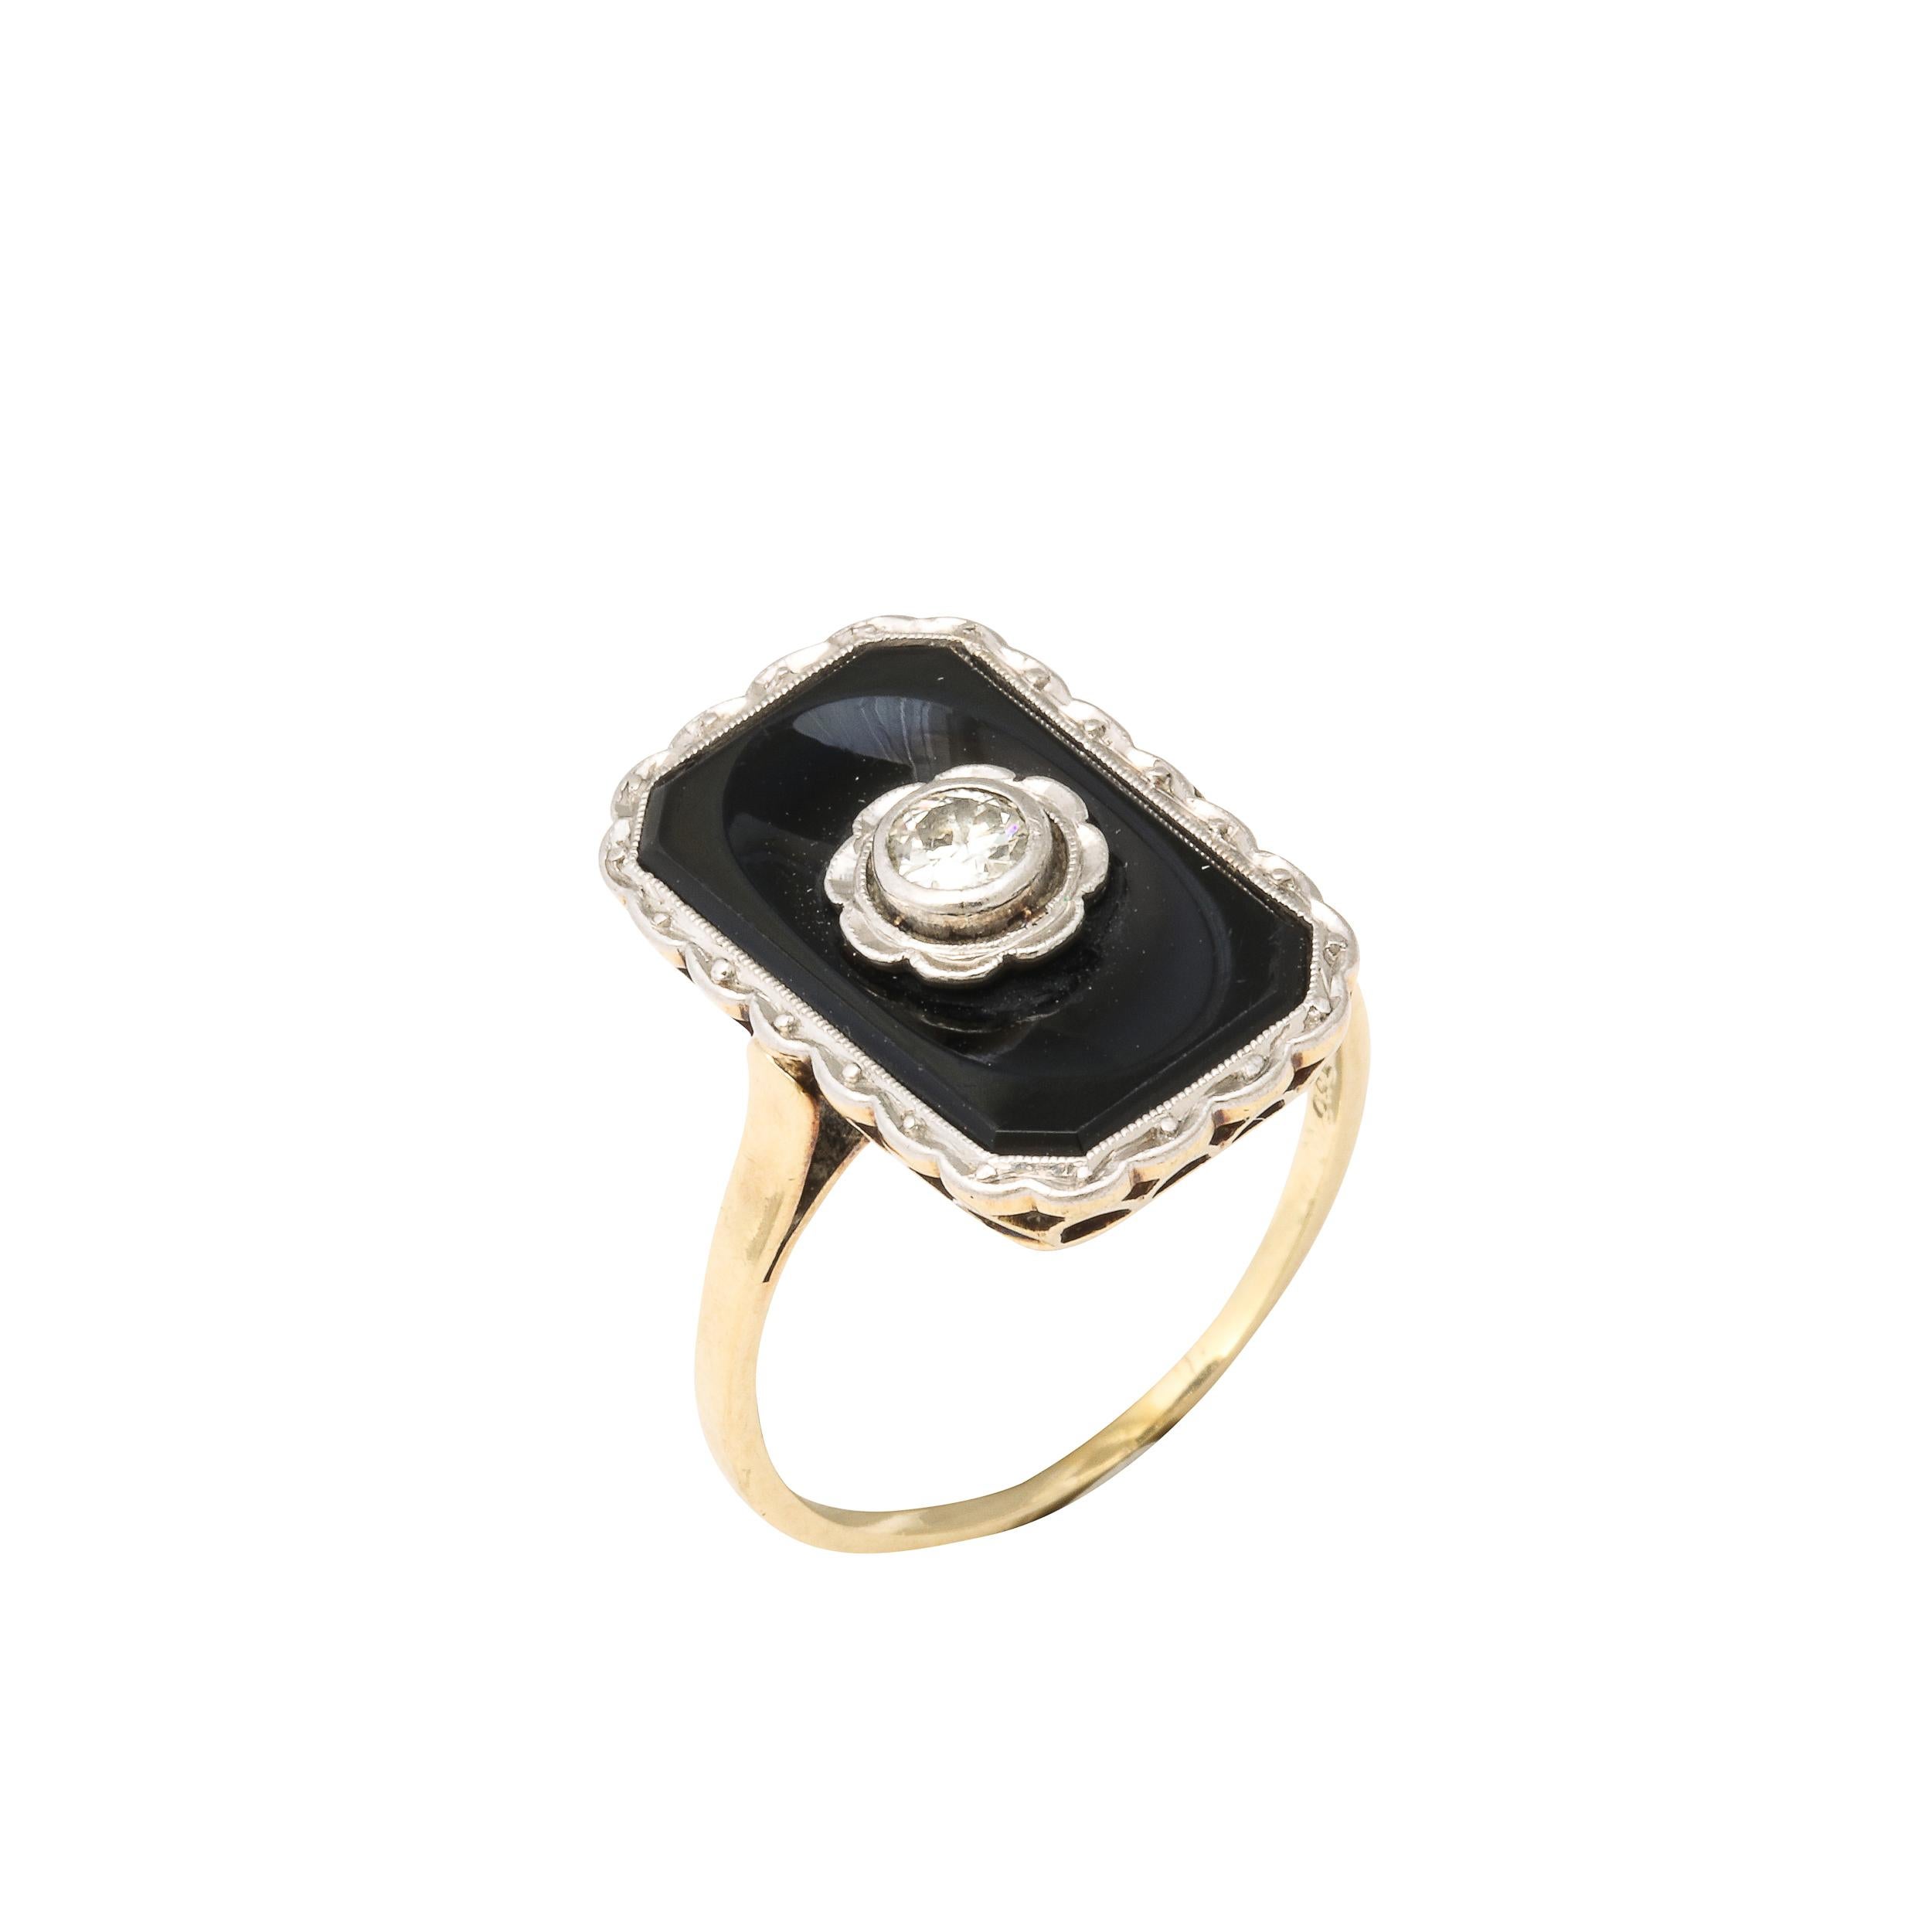 This Art Deco 14k bi -Color gold ring is set with a central rectangular cut black onyx displaying a single old European cut diamond set in 14 white gold in a stylized geometric design This ring could be worn to everything from a black tie event or